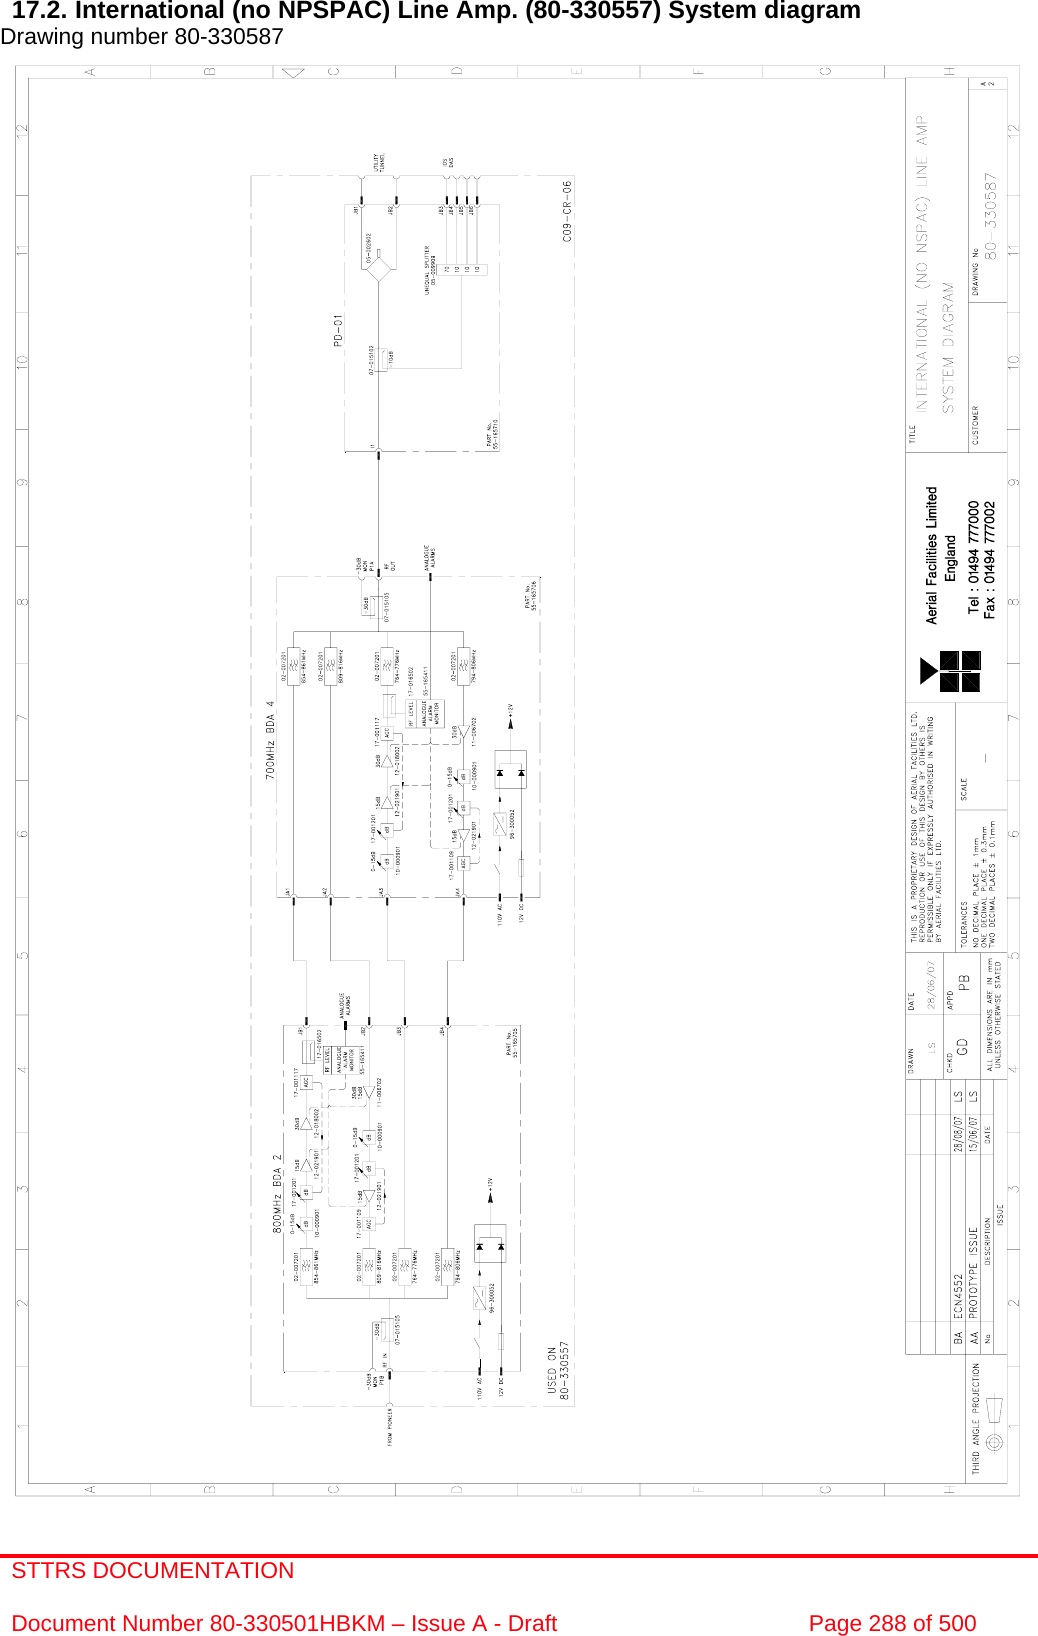 STTRS DOCUMENTATION  Document Number 80-330501HBKM – Issue A - Draft  Page 288 of 500   17.2. International (no NPSPAC) Line Amp. (80-330557) System diagram  Drawing number 80-330587                                                      